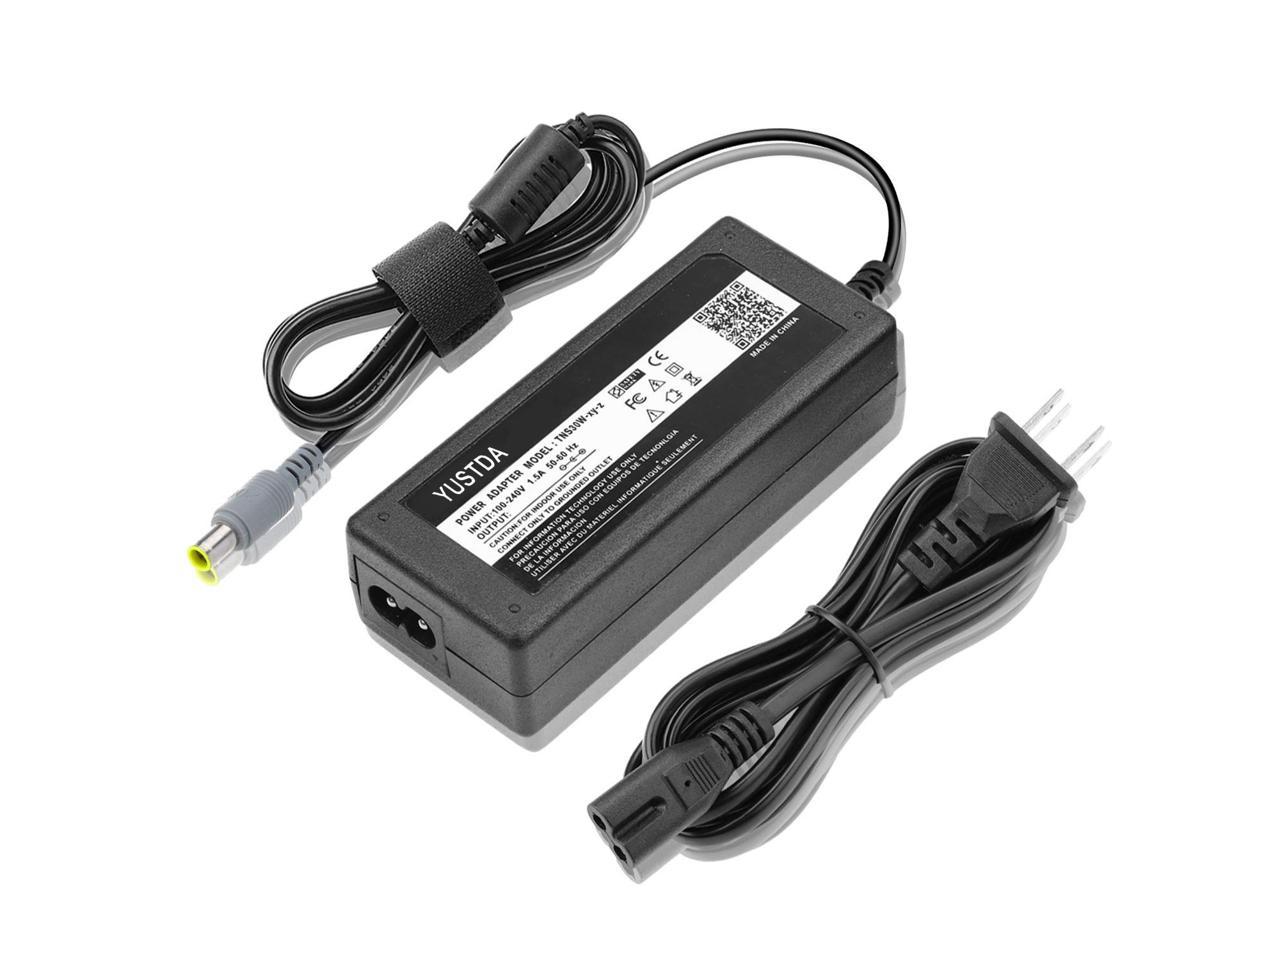 AC Adapter For Samsung LS27B350HS/ZA type LS27B350 LCD LED TV Power Supply Cord 